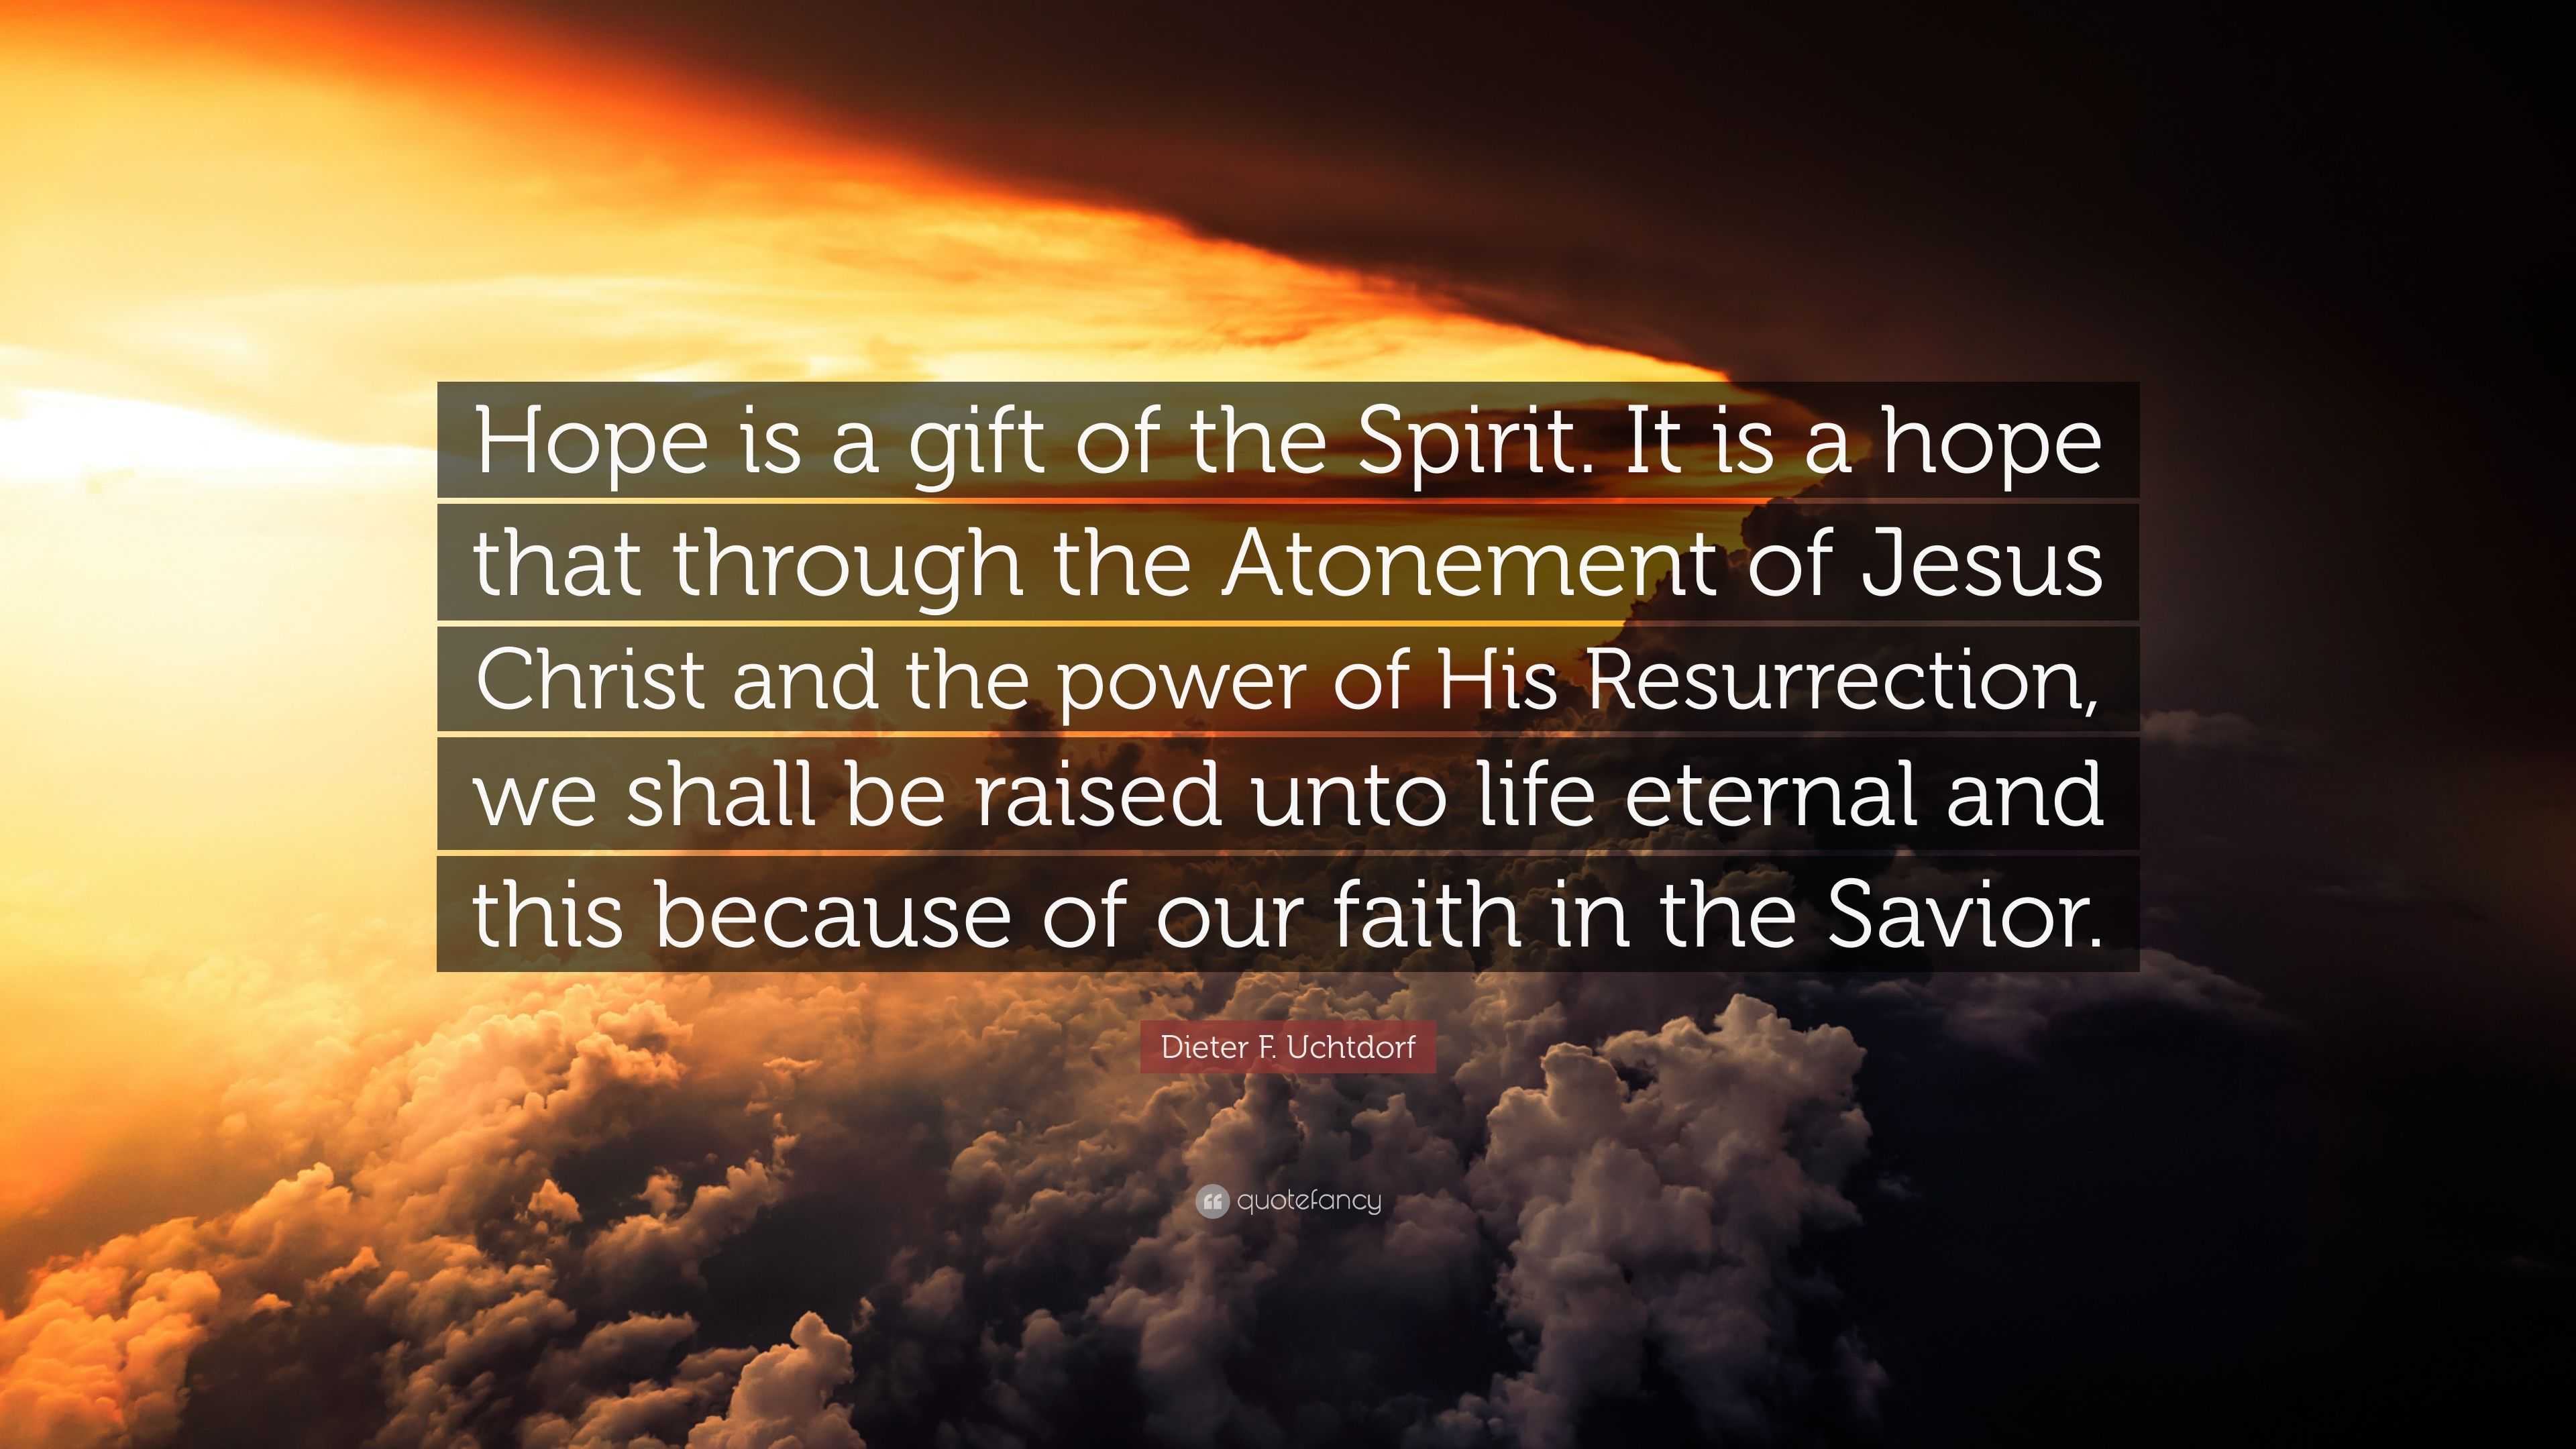 Dieter F. Uchtdorf Quote: “Hope is a gift of the Spirit. It is a hope ...